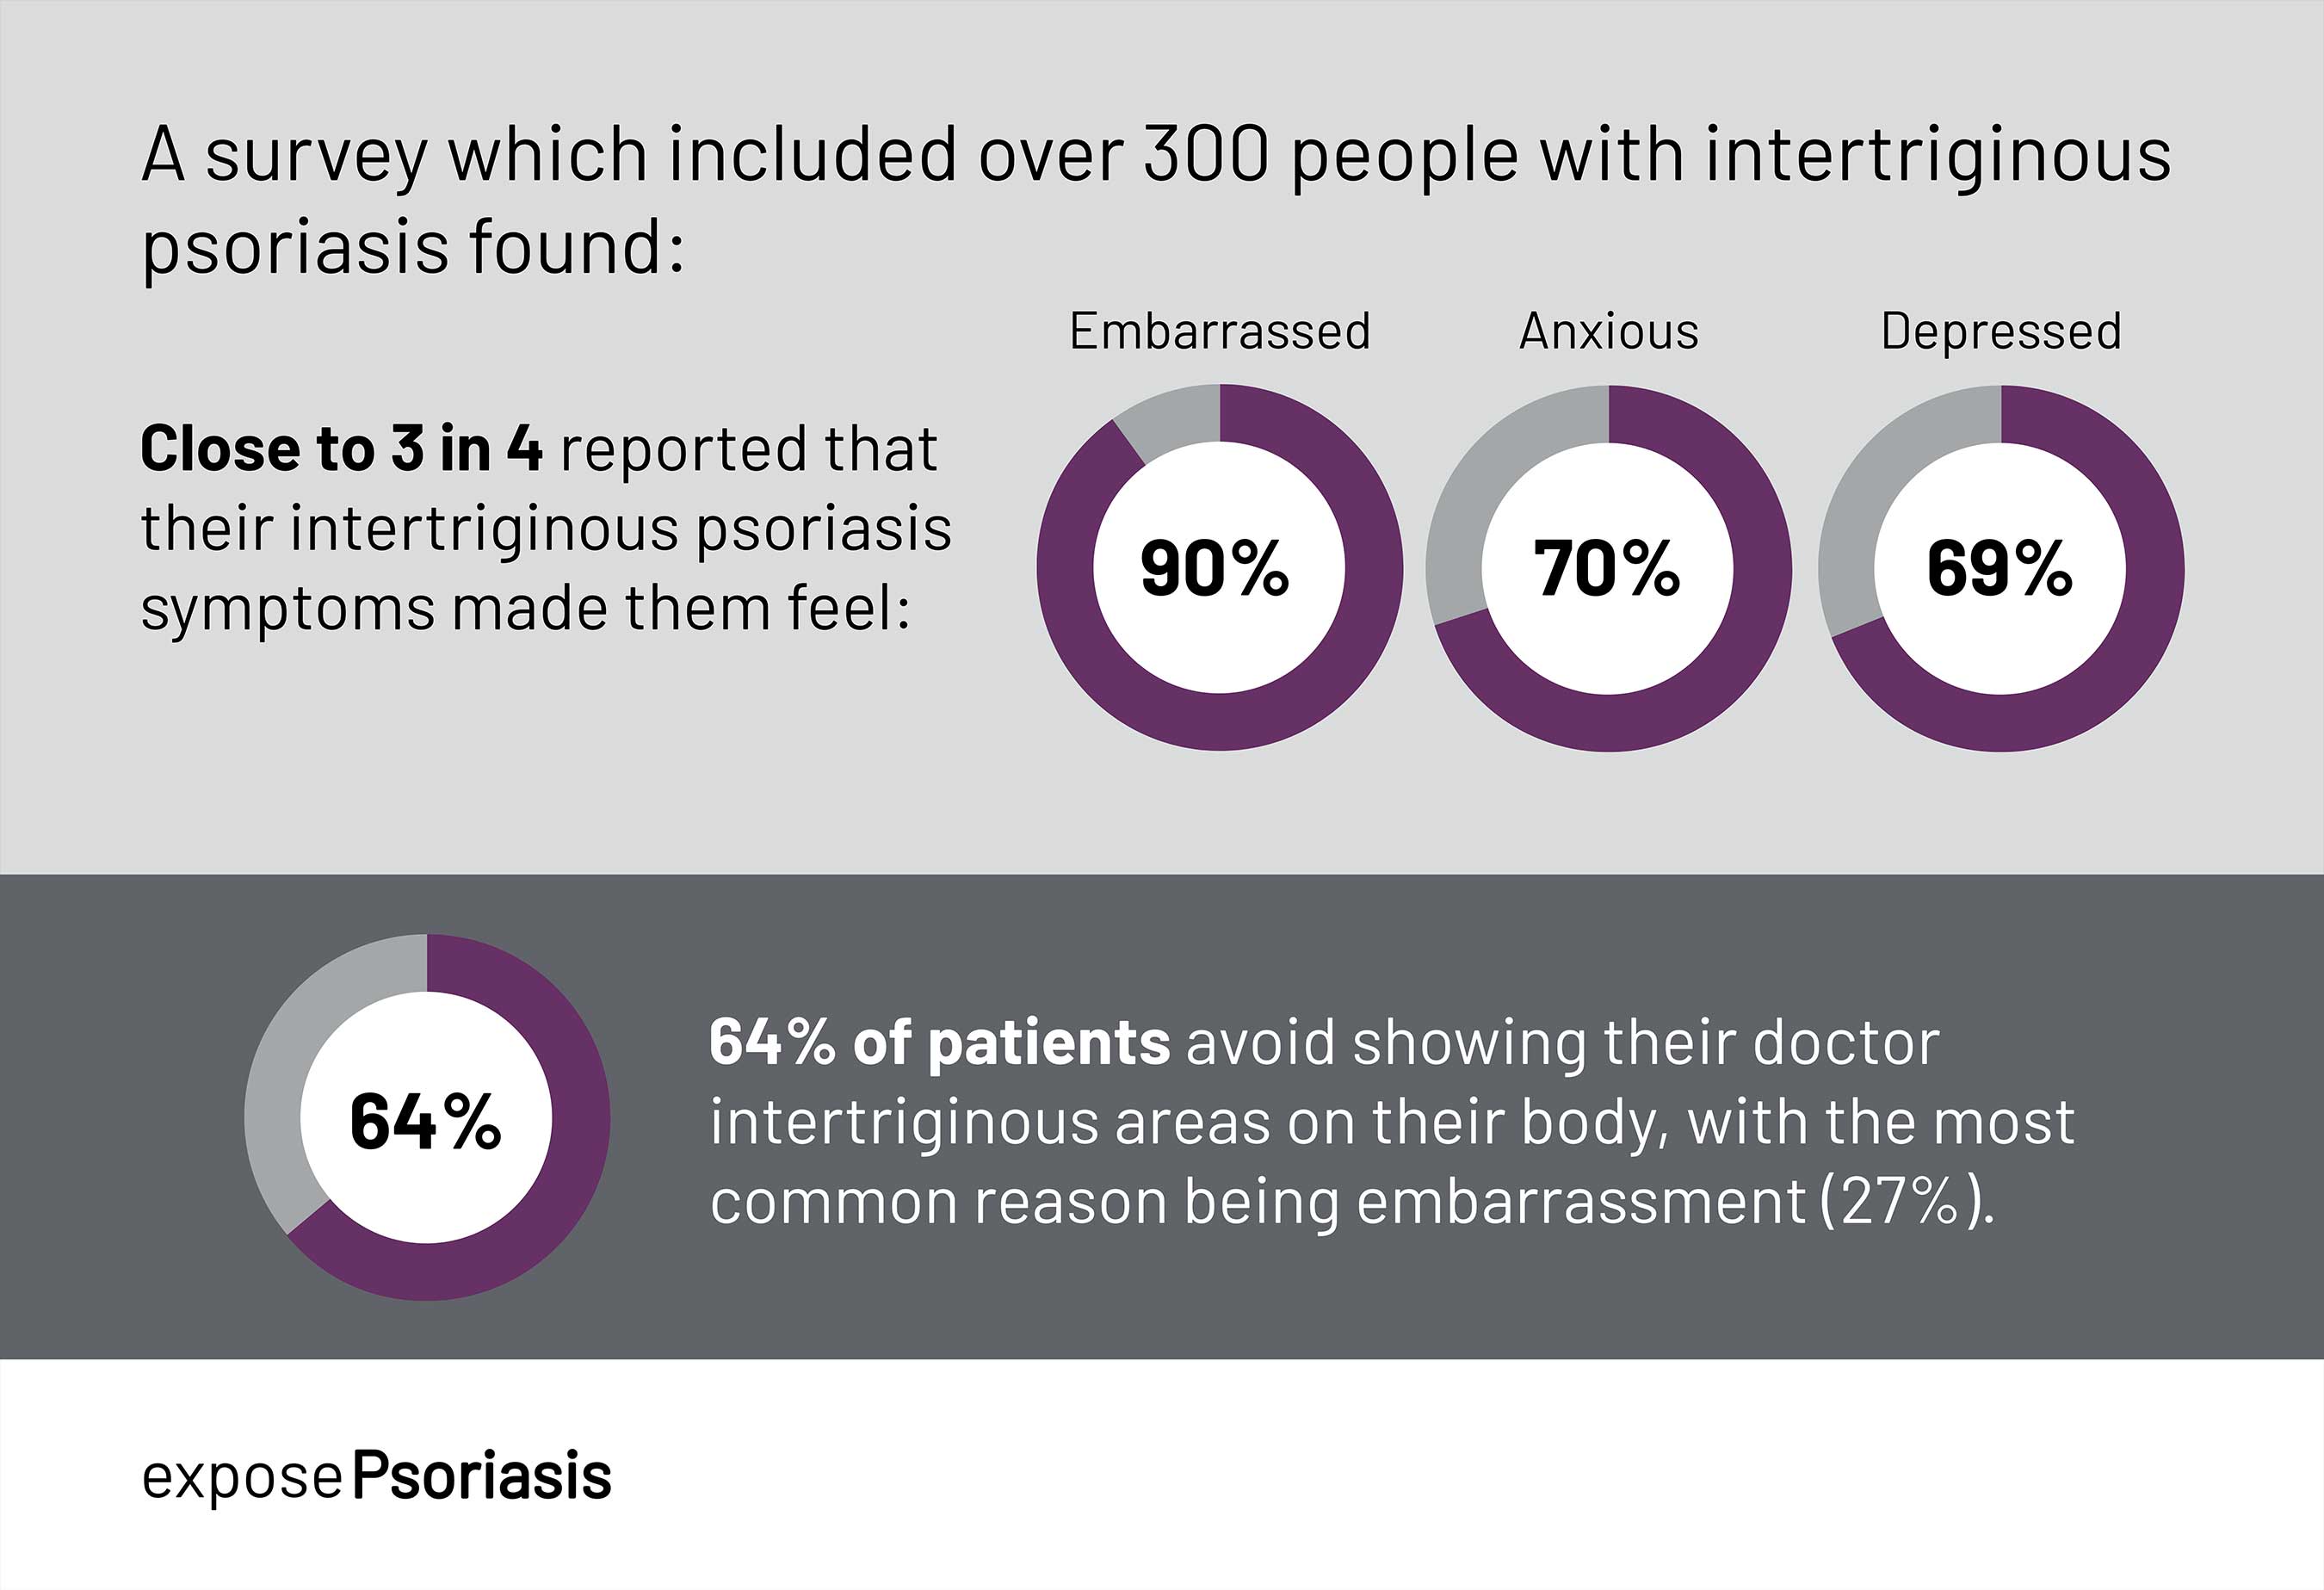 Arcutis commissioned a survey among U.S. adults (18+) with psoriasis to better understand the emotional impact of their condition and challenges experienced by those affected.